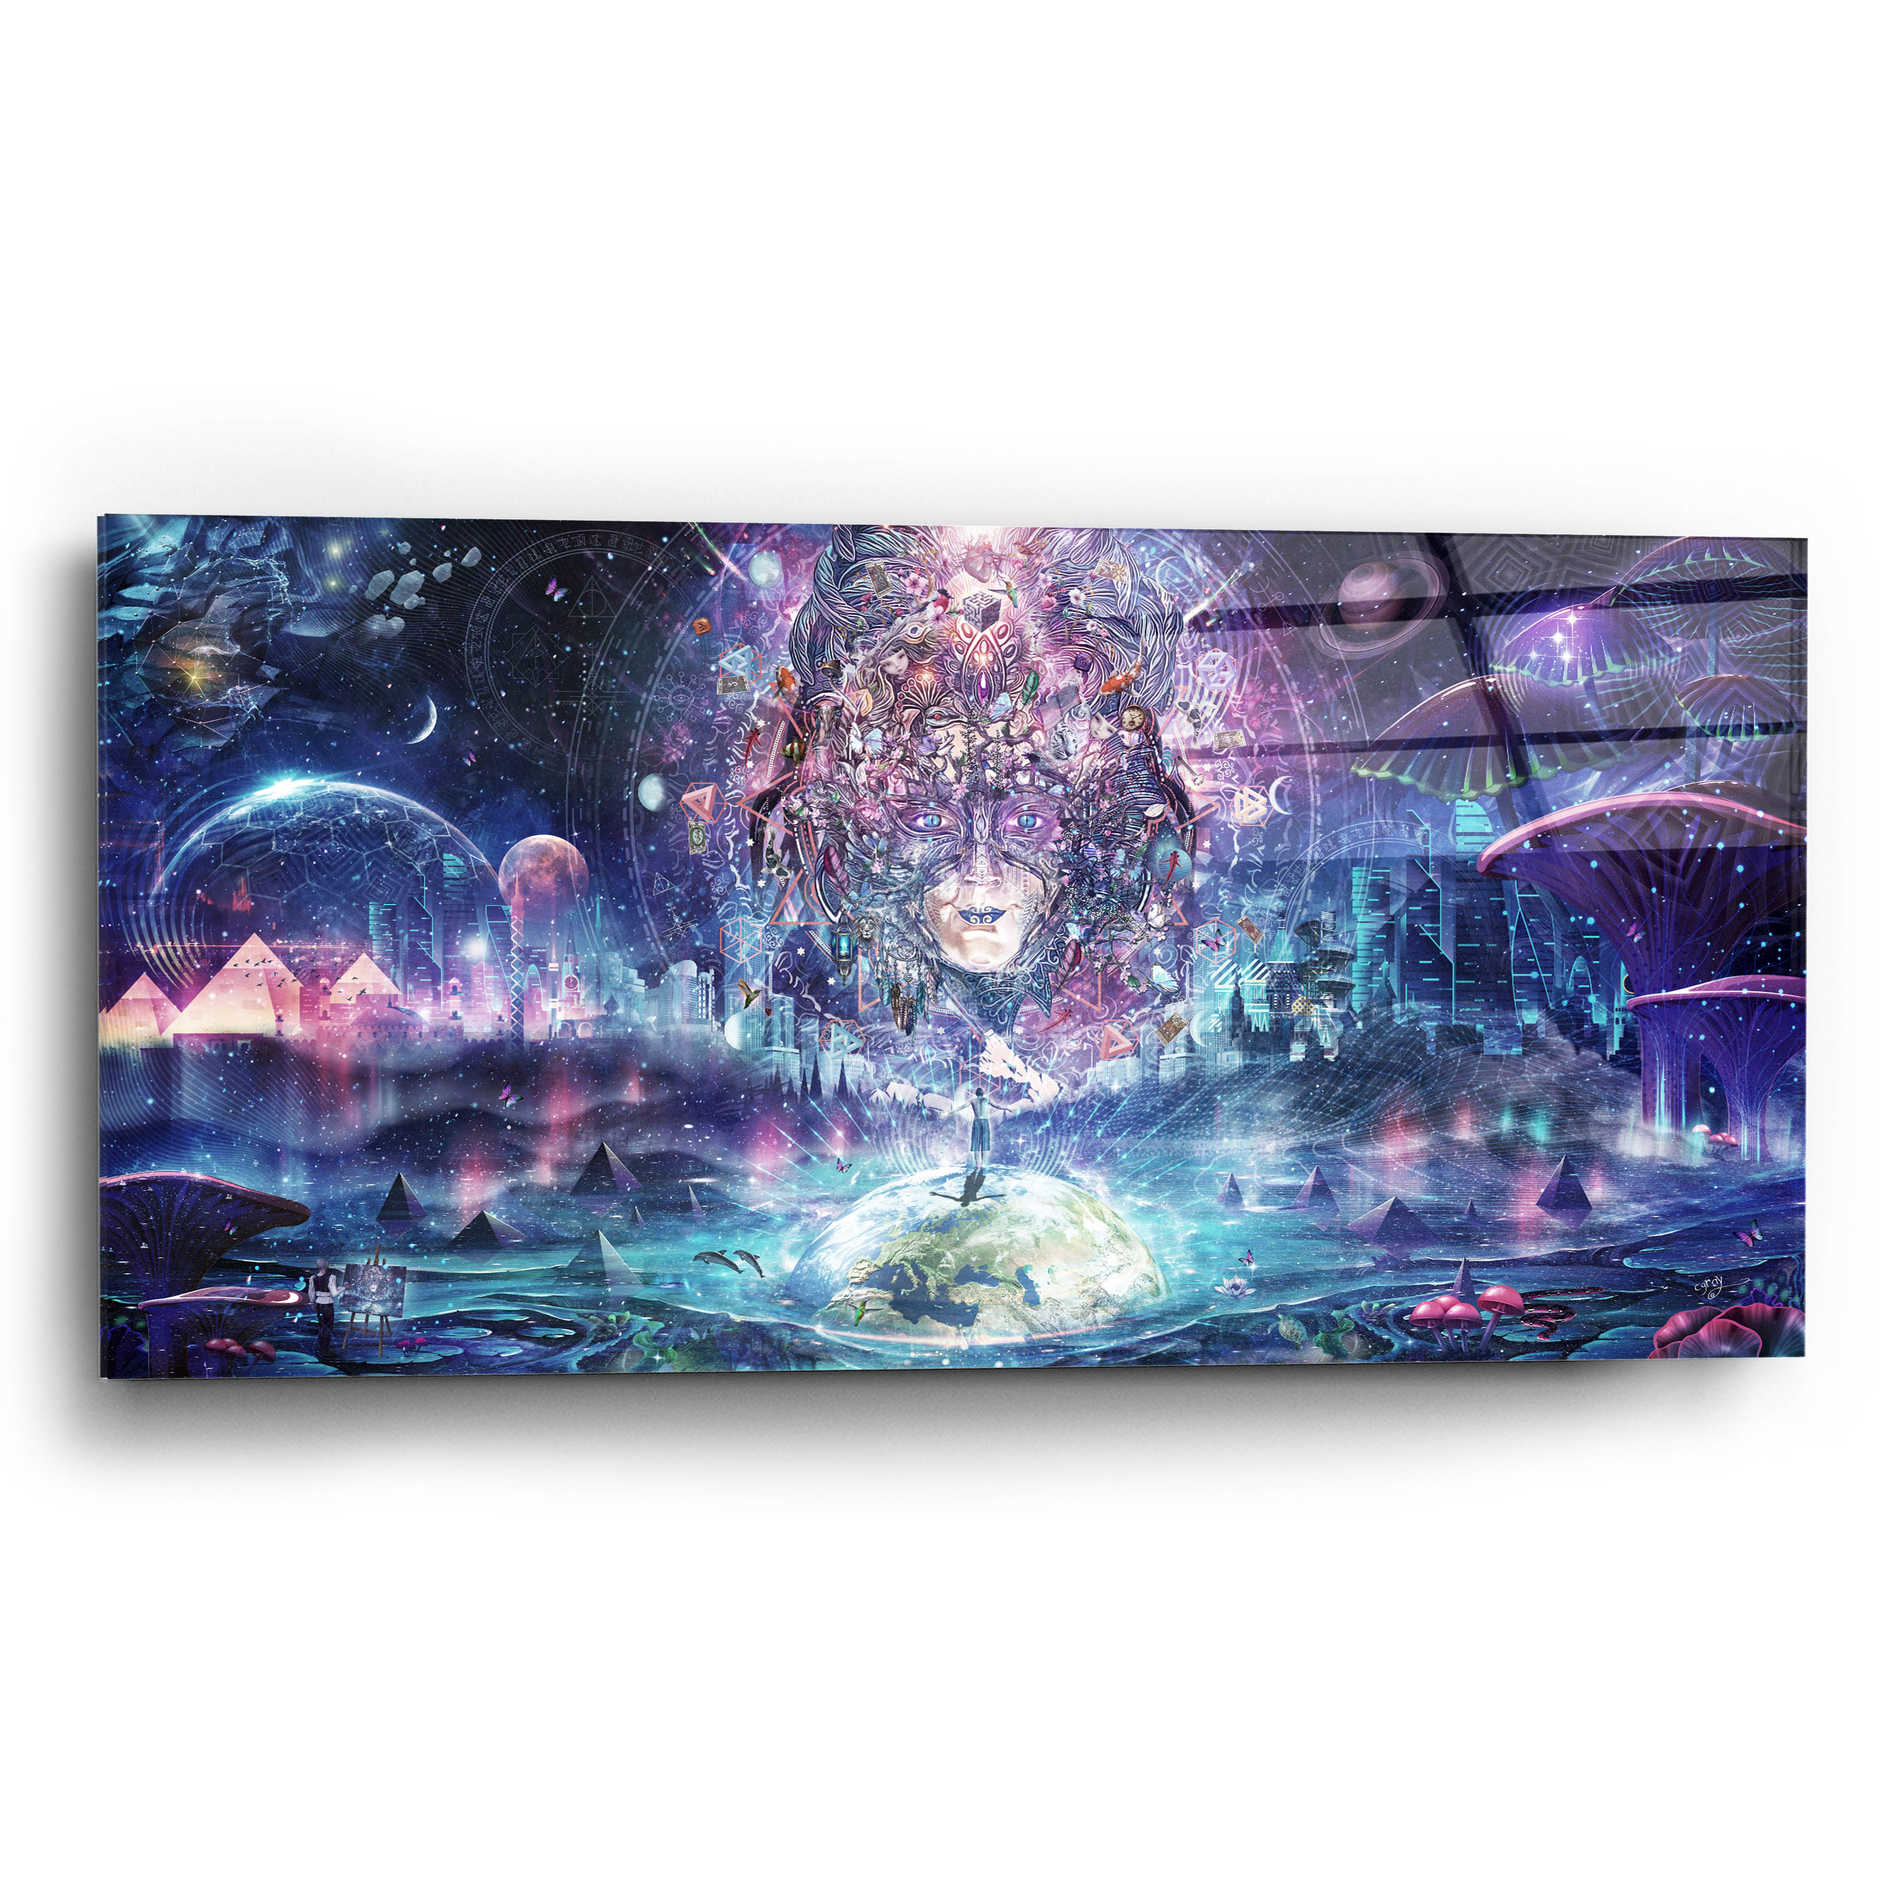 Epic Art 'Quest for the Peak Experience' by Cameron Gray, Acrylic Glass Wall Art,24x12